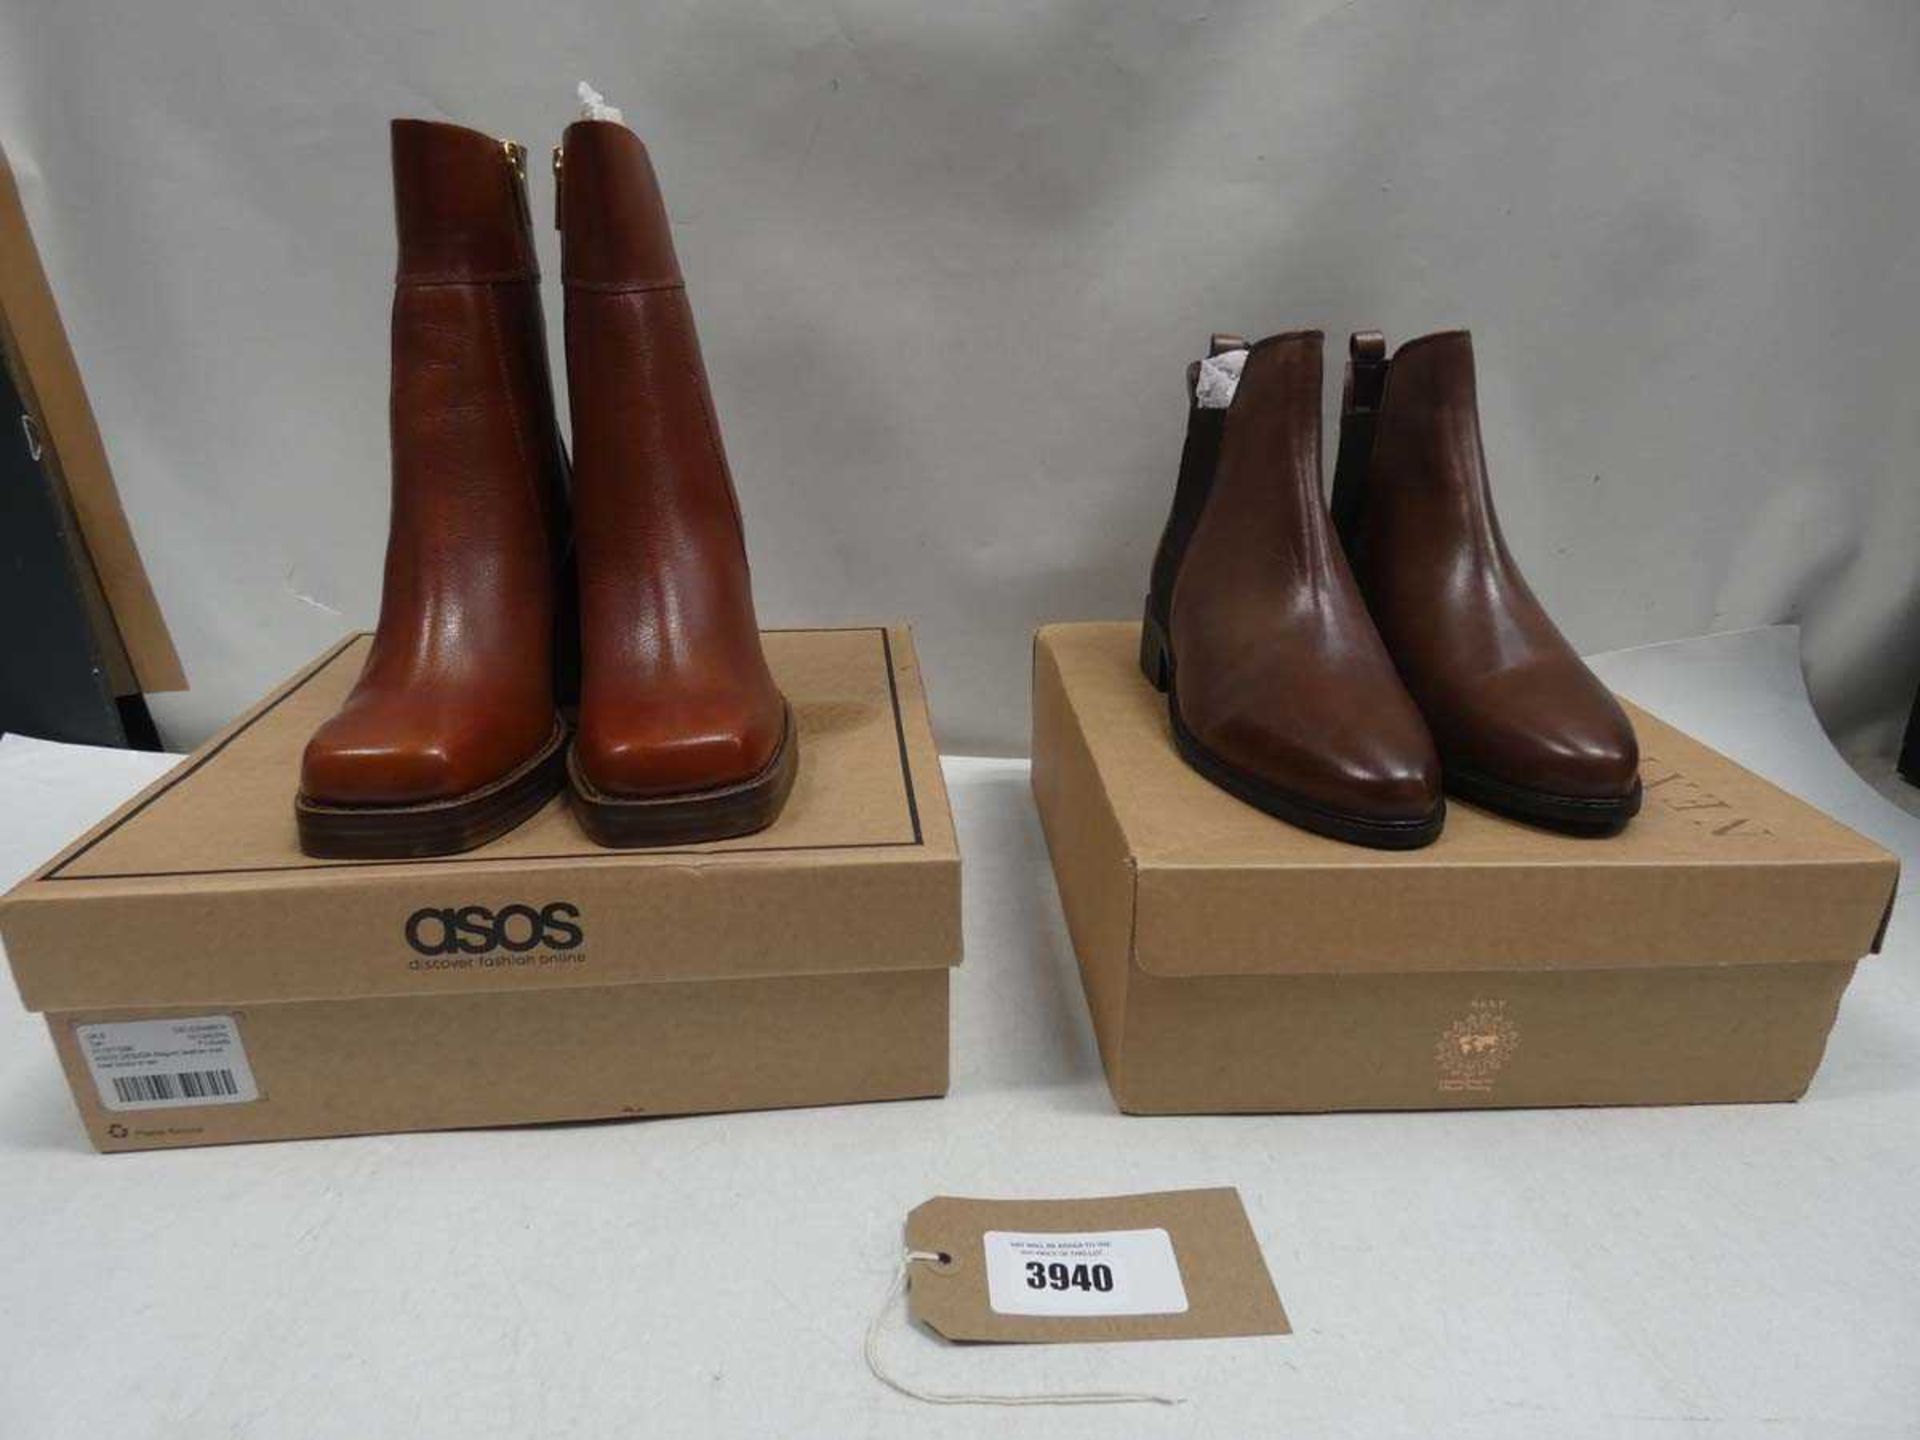 +VAT Asos Region boots size 6 and a pair of Next boots size 7